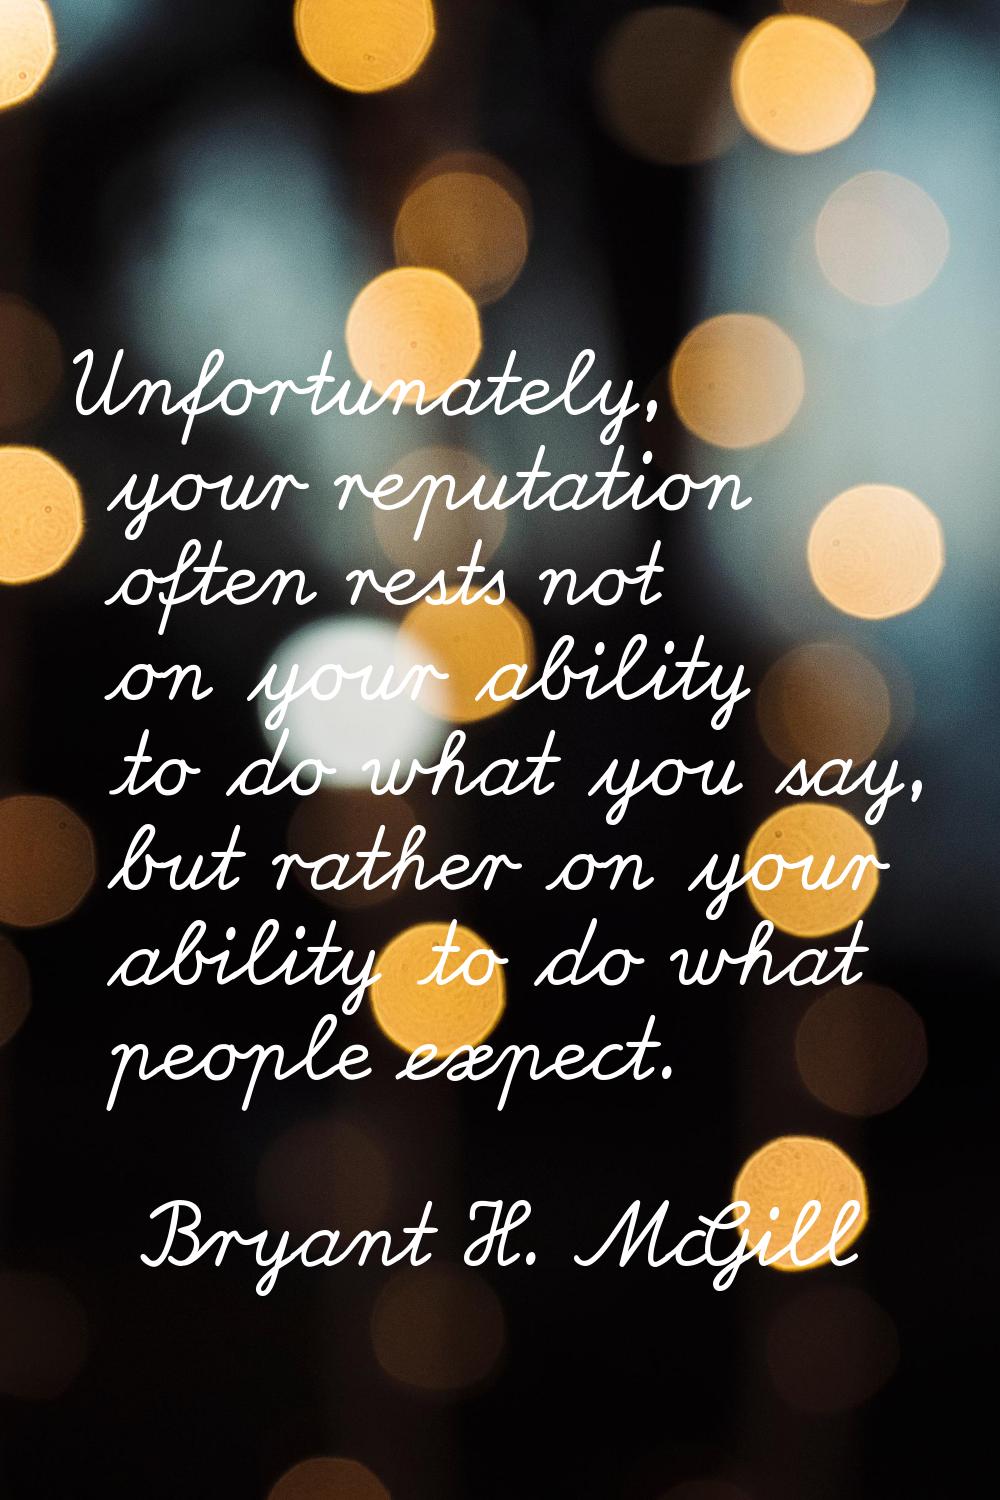 Unfortunately, your reputation often rests not on your ability to do what you say, but rather on yo